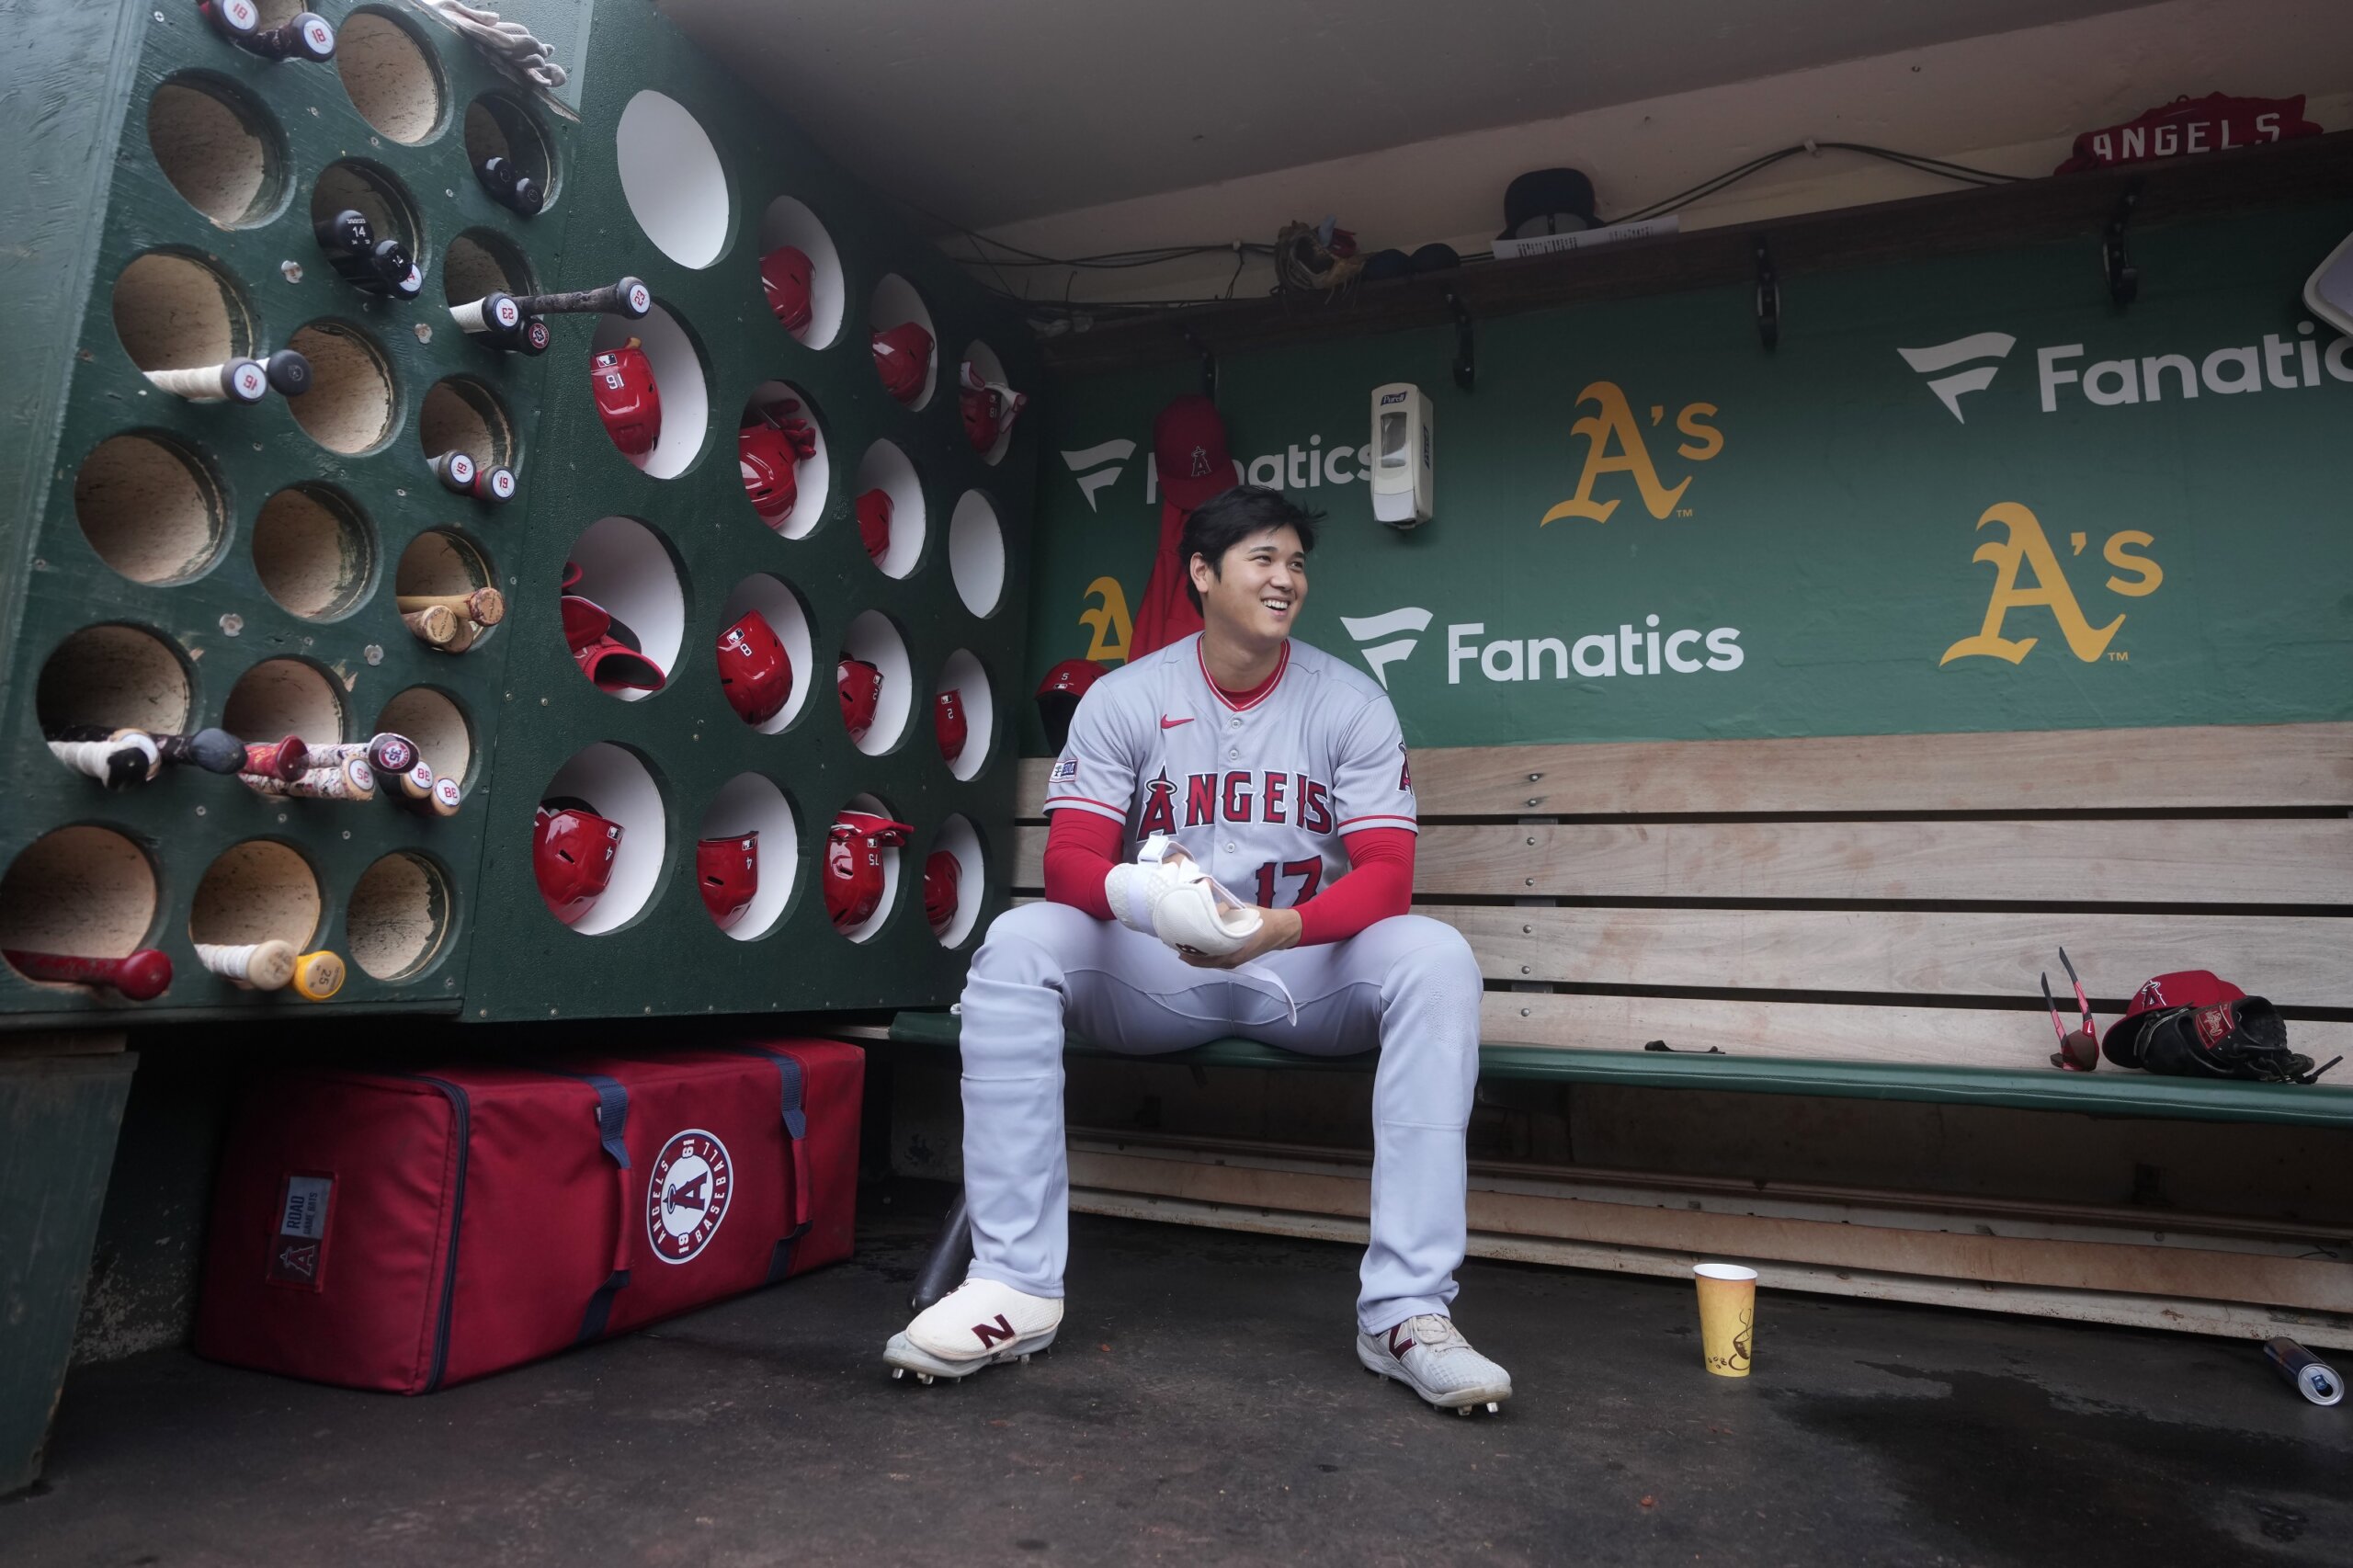 Shohei Ohtani suffers elbow injury, will not pitch rest of 2023 season